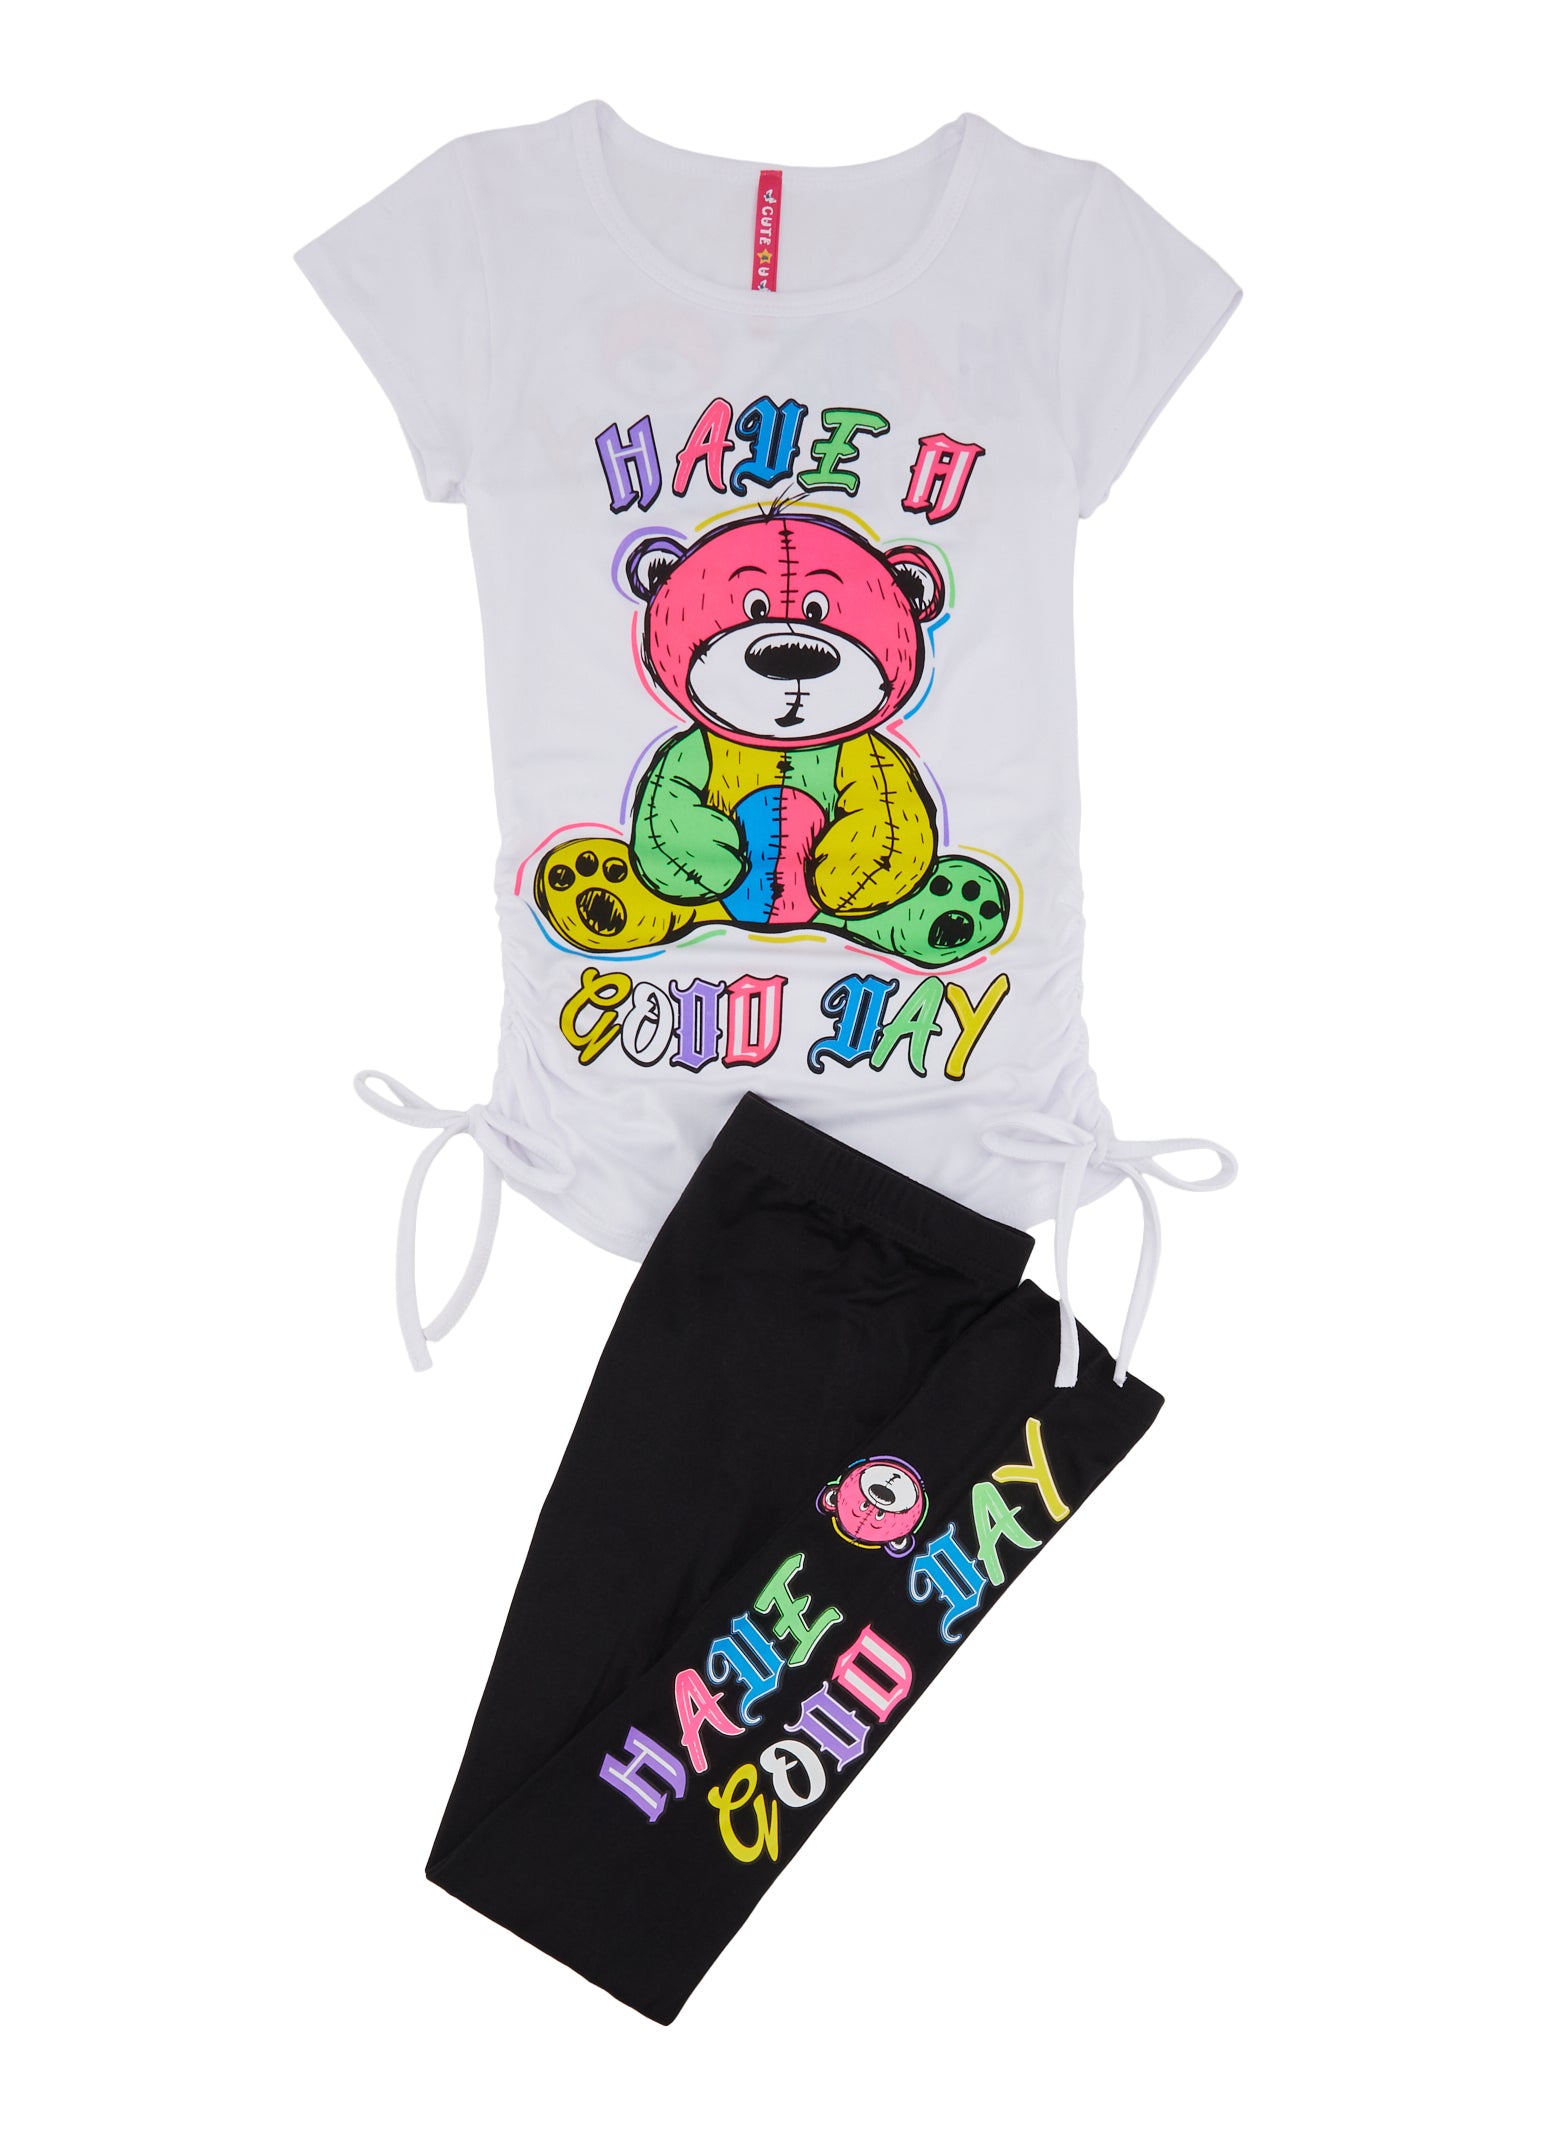 Girls Have a Good Day Graphic Tee and Leggings, White, Size 14-16